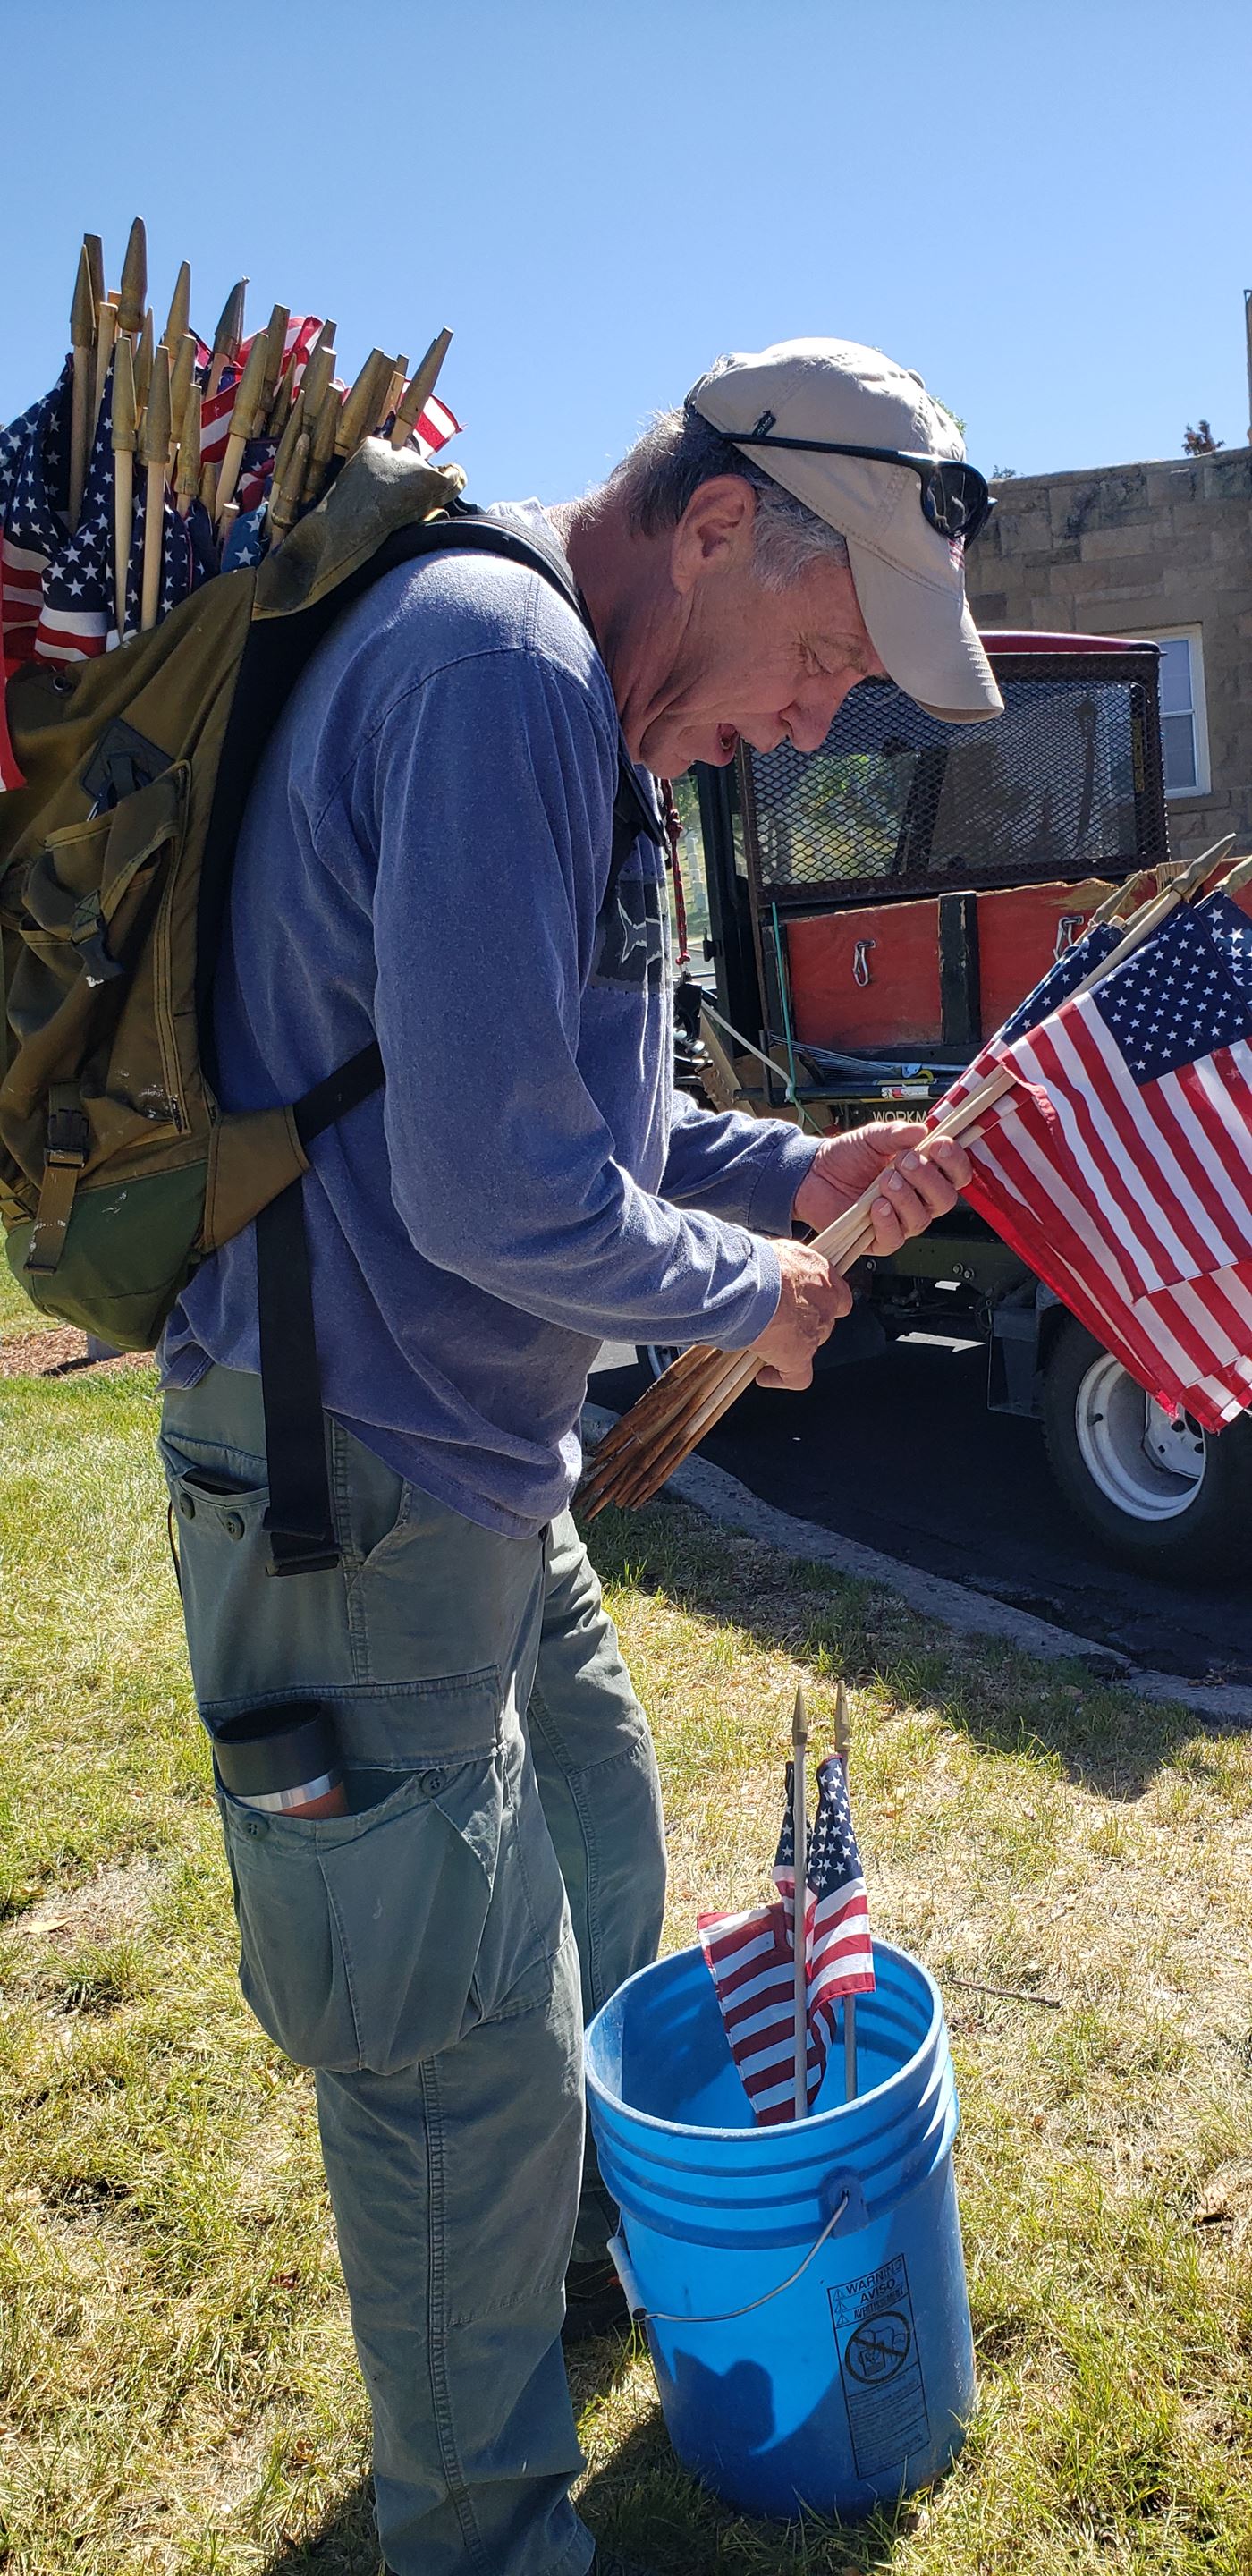 A bucket and a backpack help to retire flags